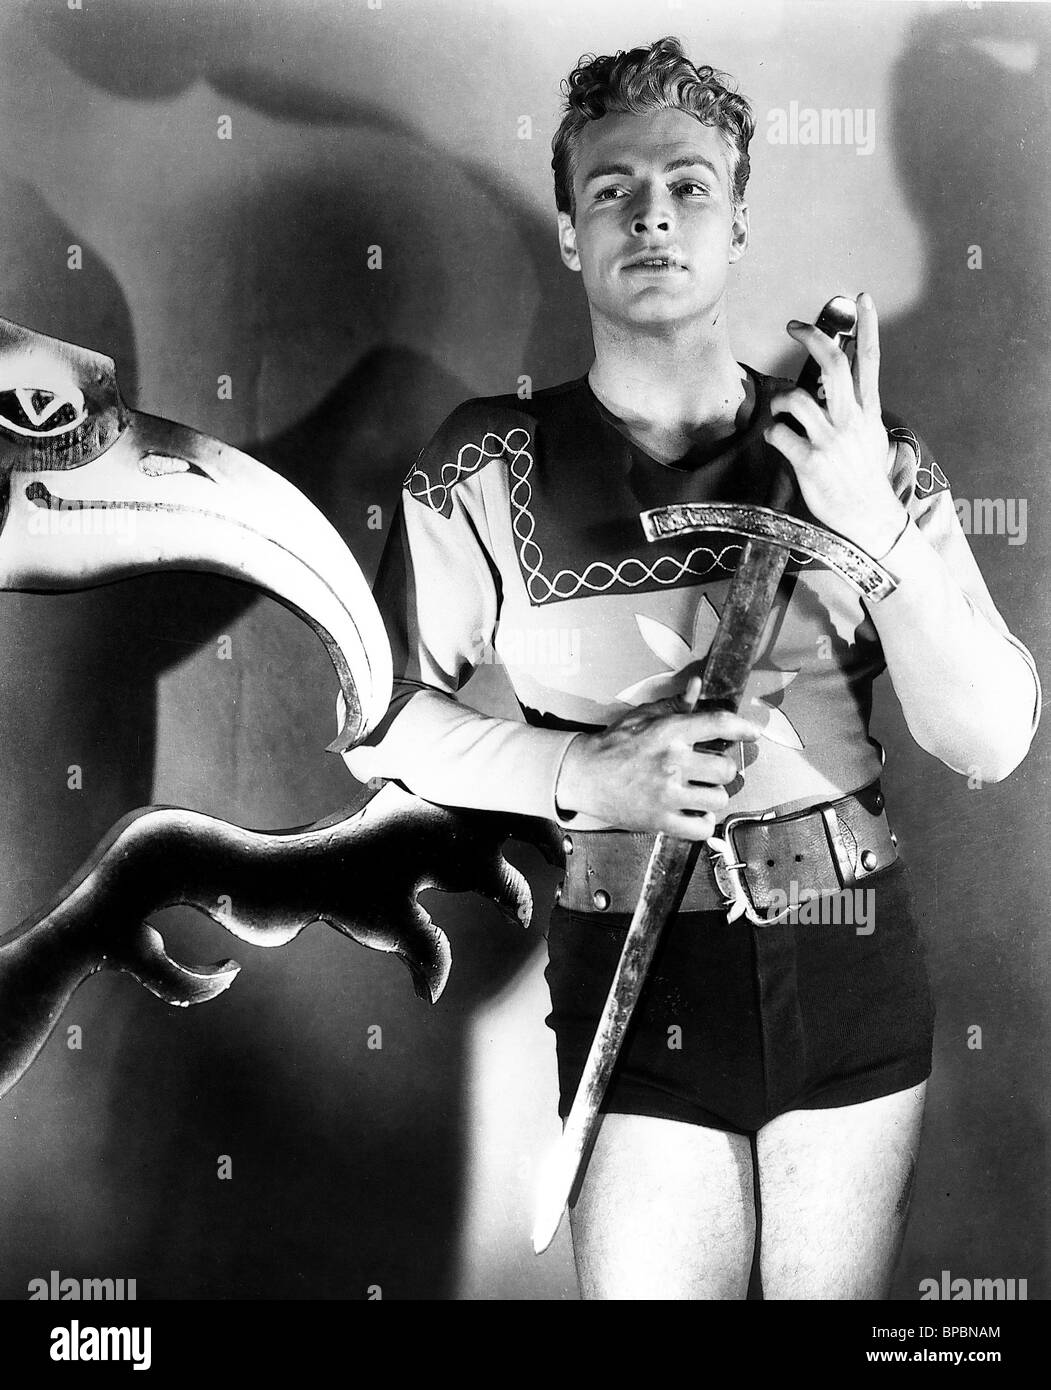 Buster Crabbe - Autographed Inscribed Photograph Circa 1938